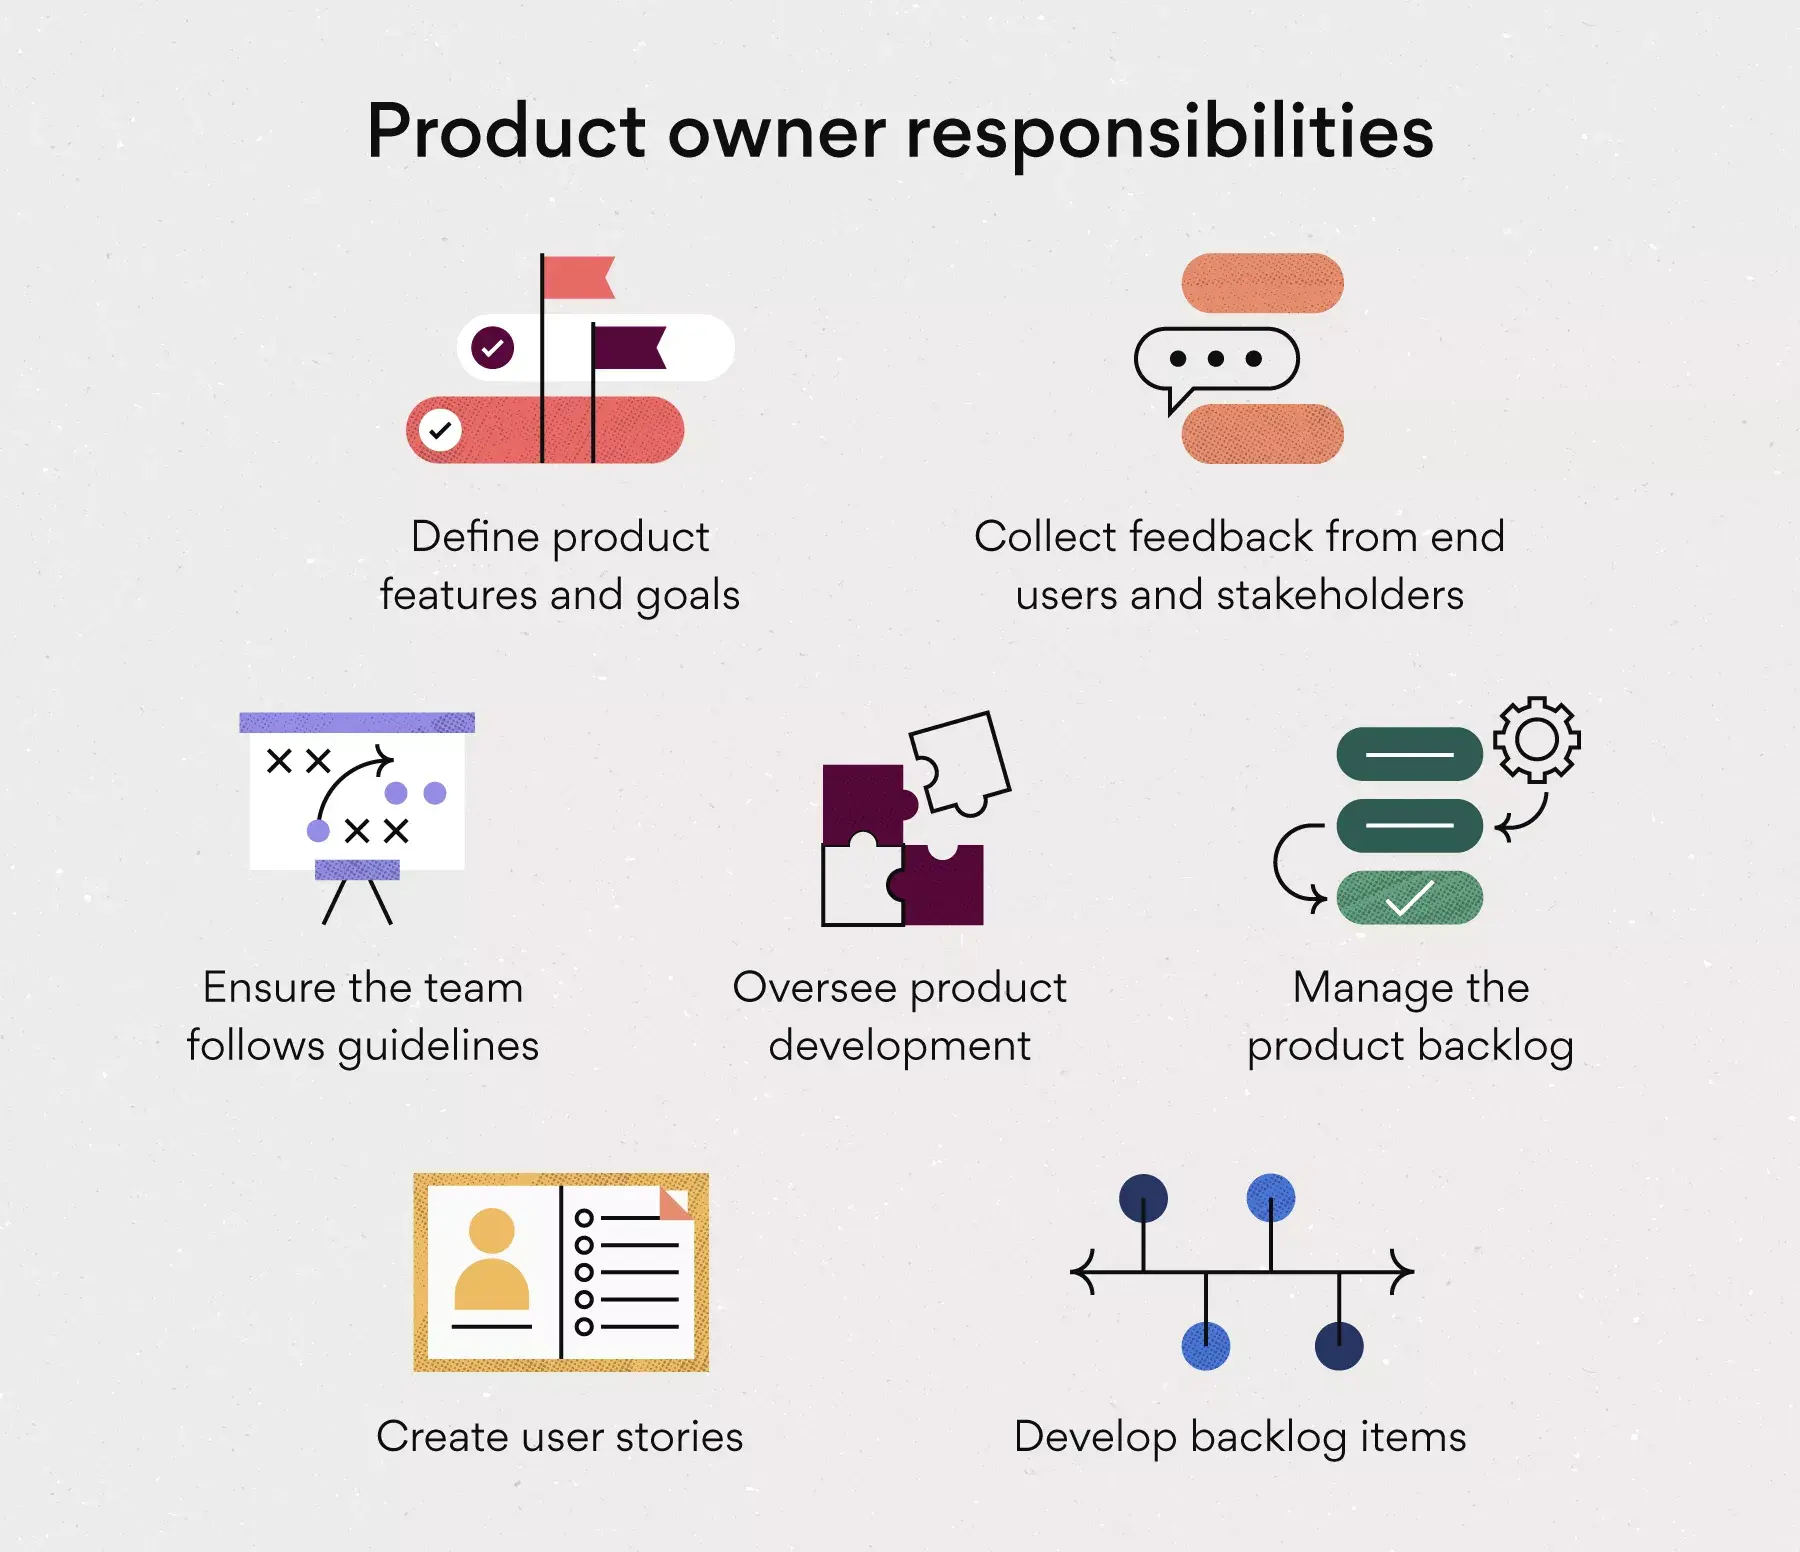 [inline illustration] Product owner responsibilities (infographic)